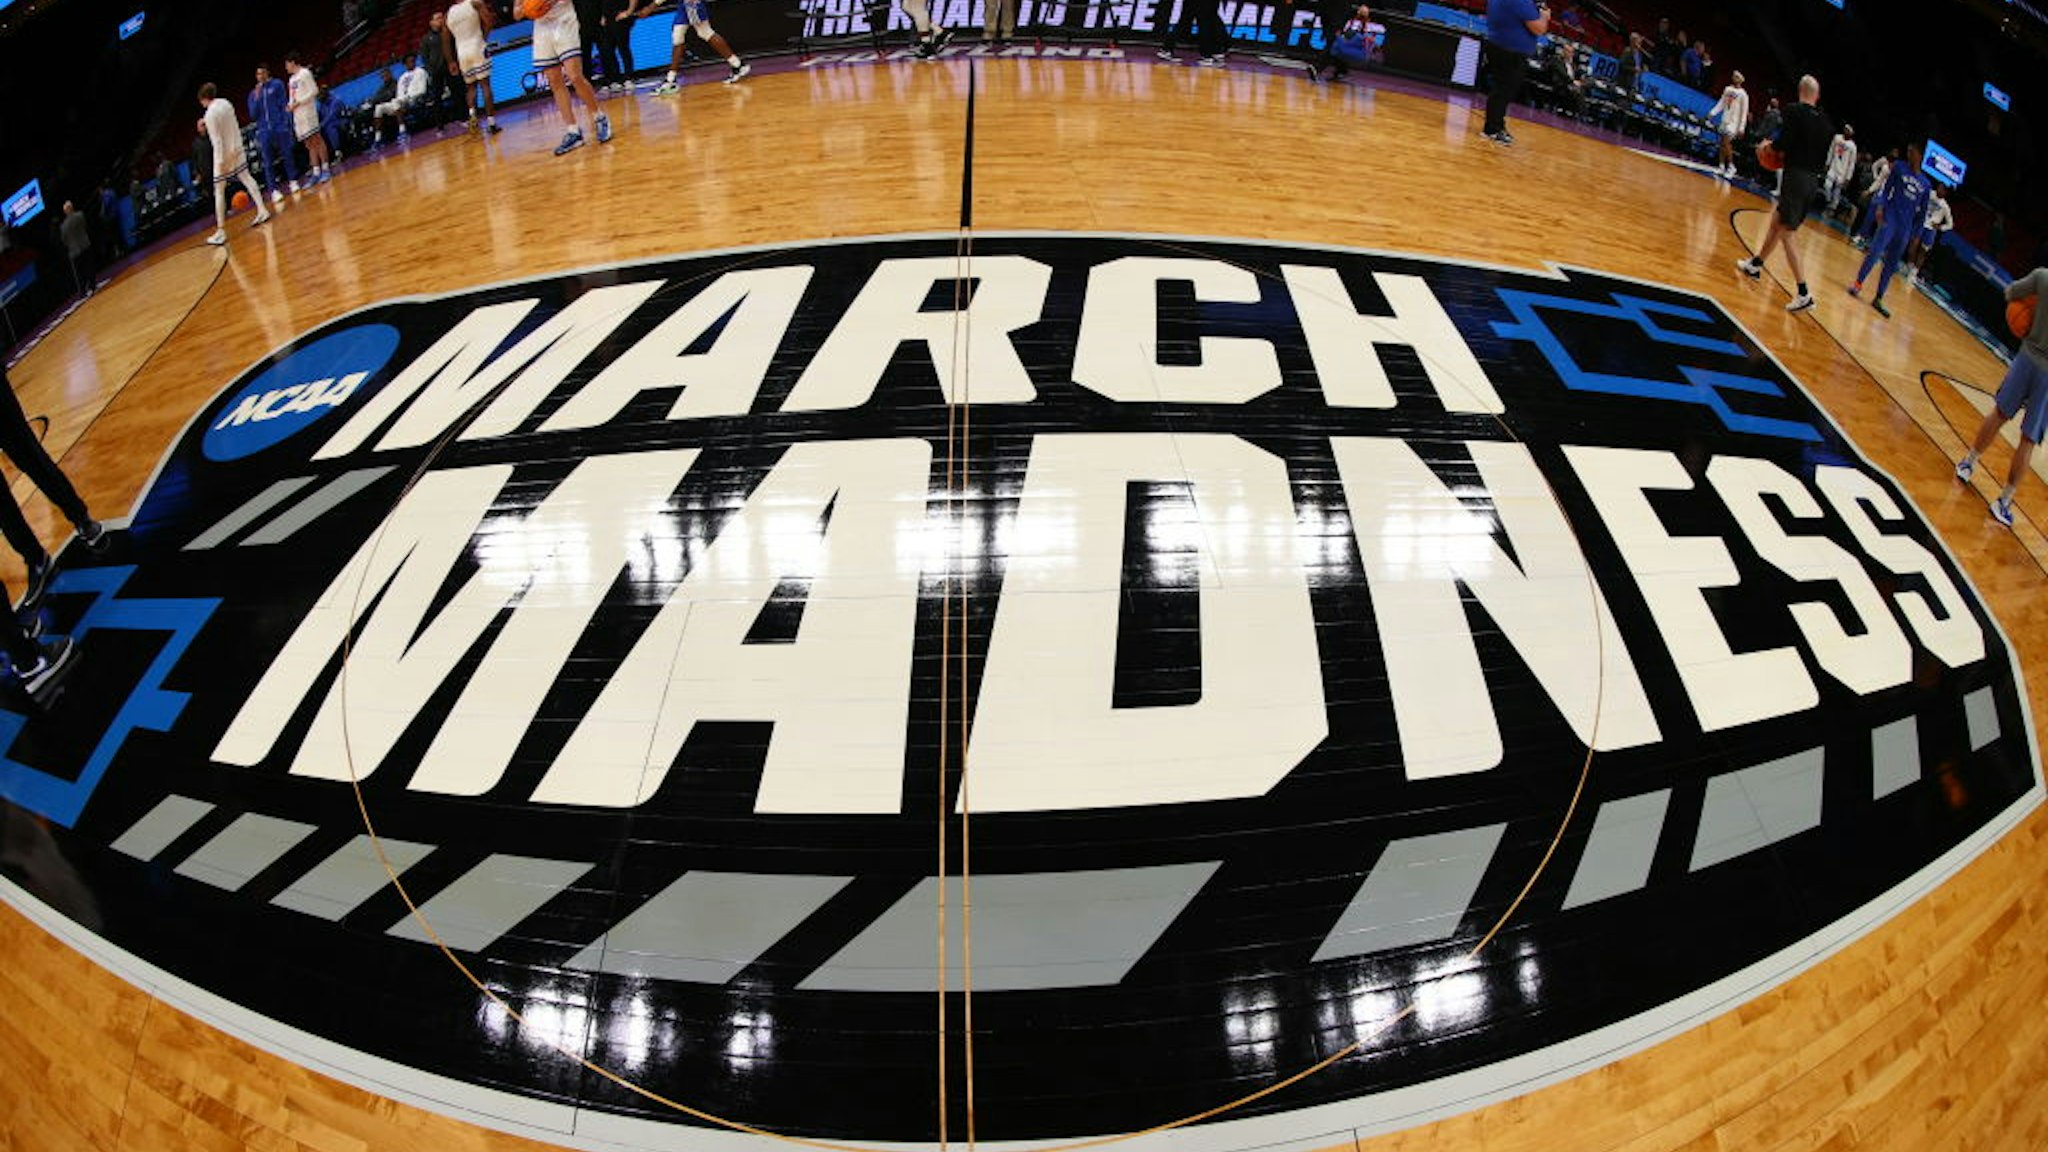 PORTLAND, OR - MARCH 17: The March Madness logo is shown on the floor of the Moda Center before the Boise State Broncos take on the Memphis Tigers in the first round of the 2022 NCAA Men's Basketball Tournament on March 17, 2022 in Portland, Oregon. (Photo by Jamie Schwaberow/NCAA Photos via Getty Images)